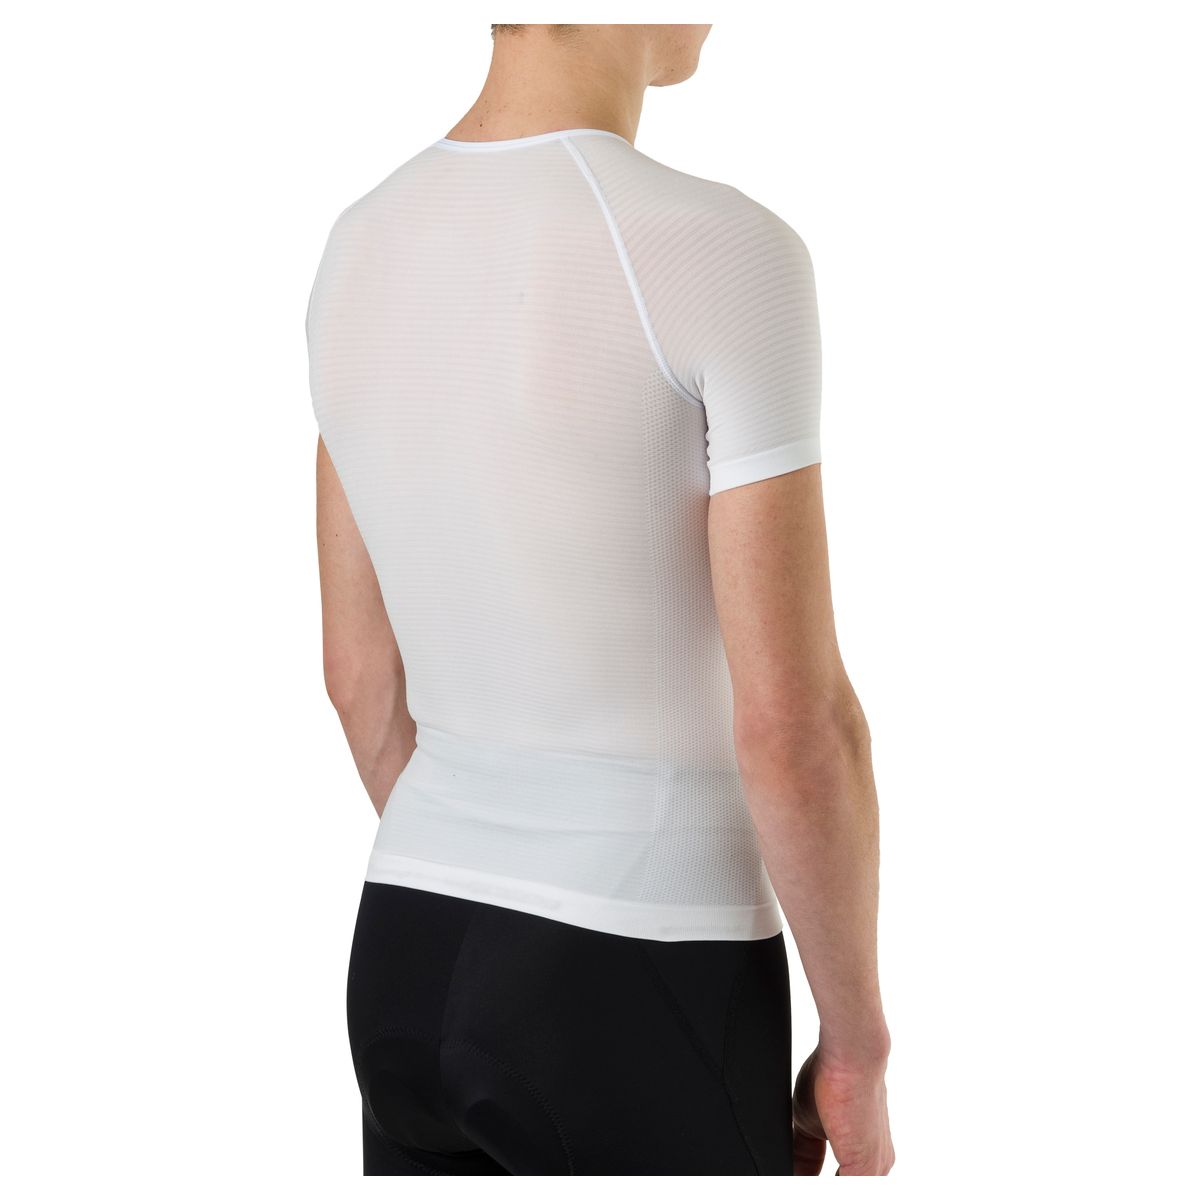 Summerday Base Layer fit example